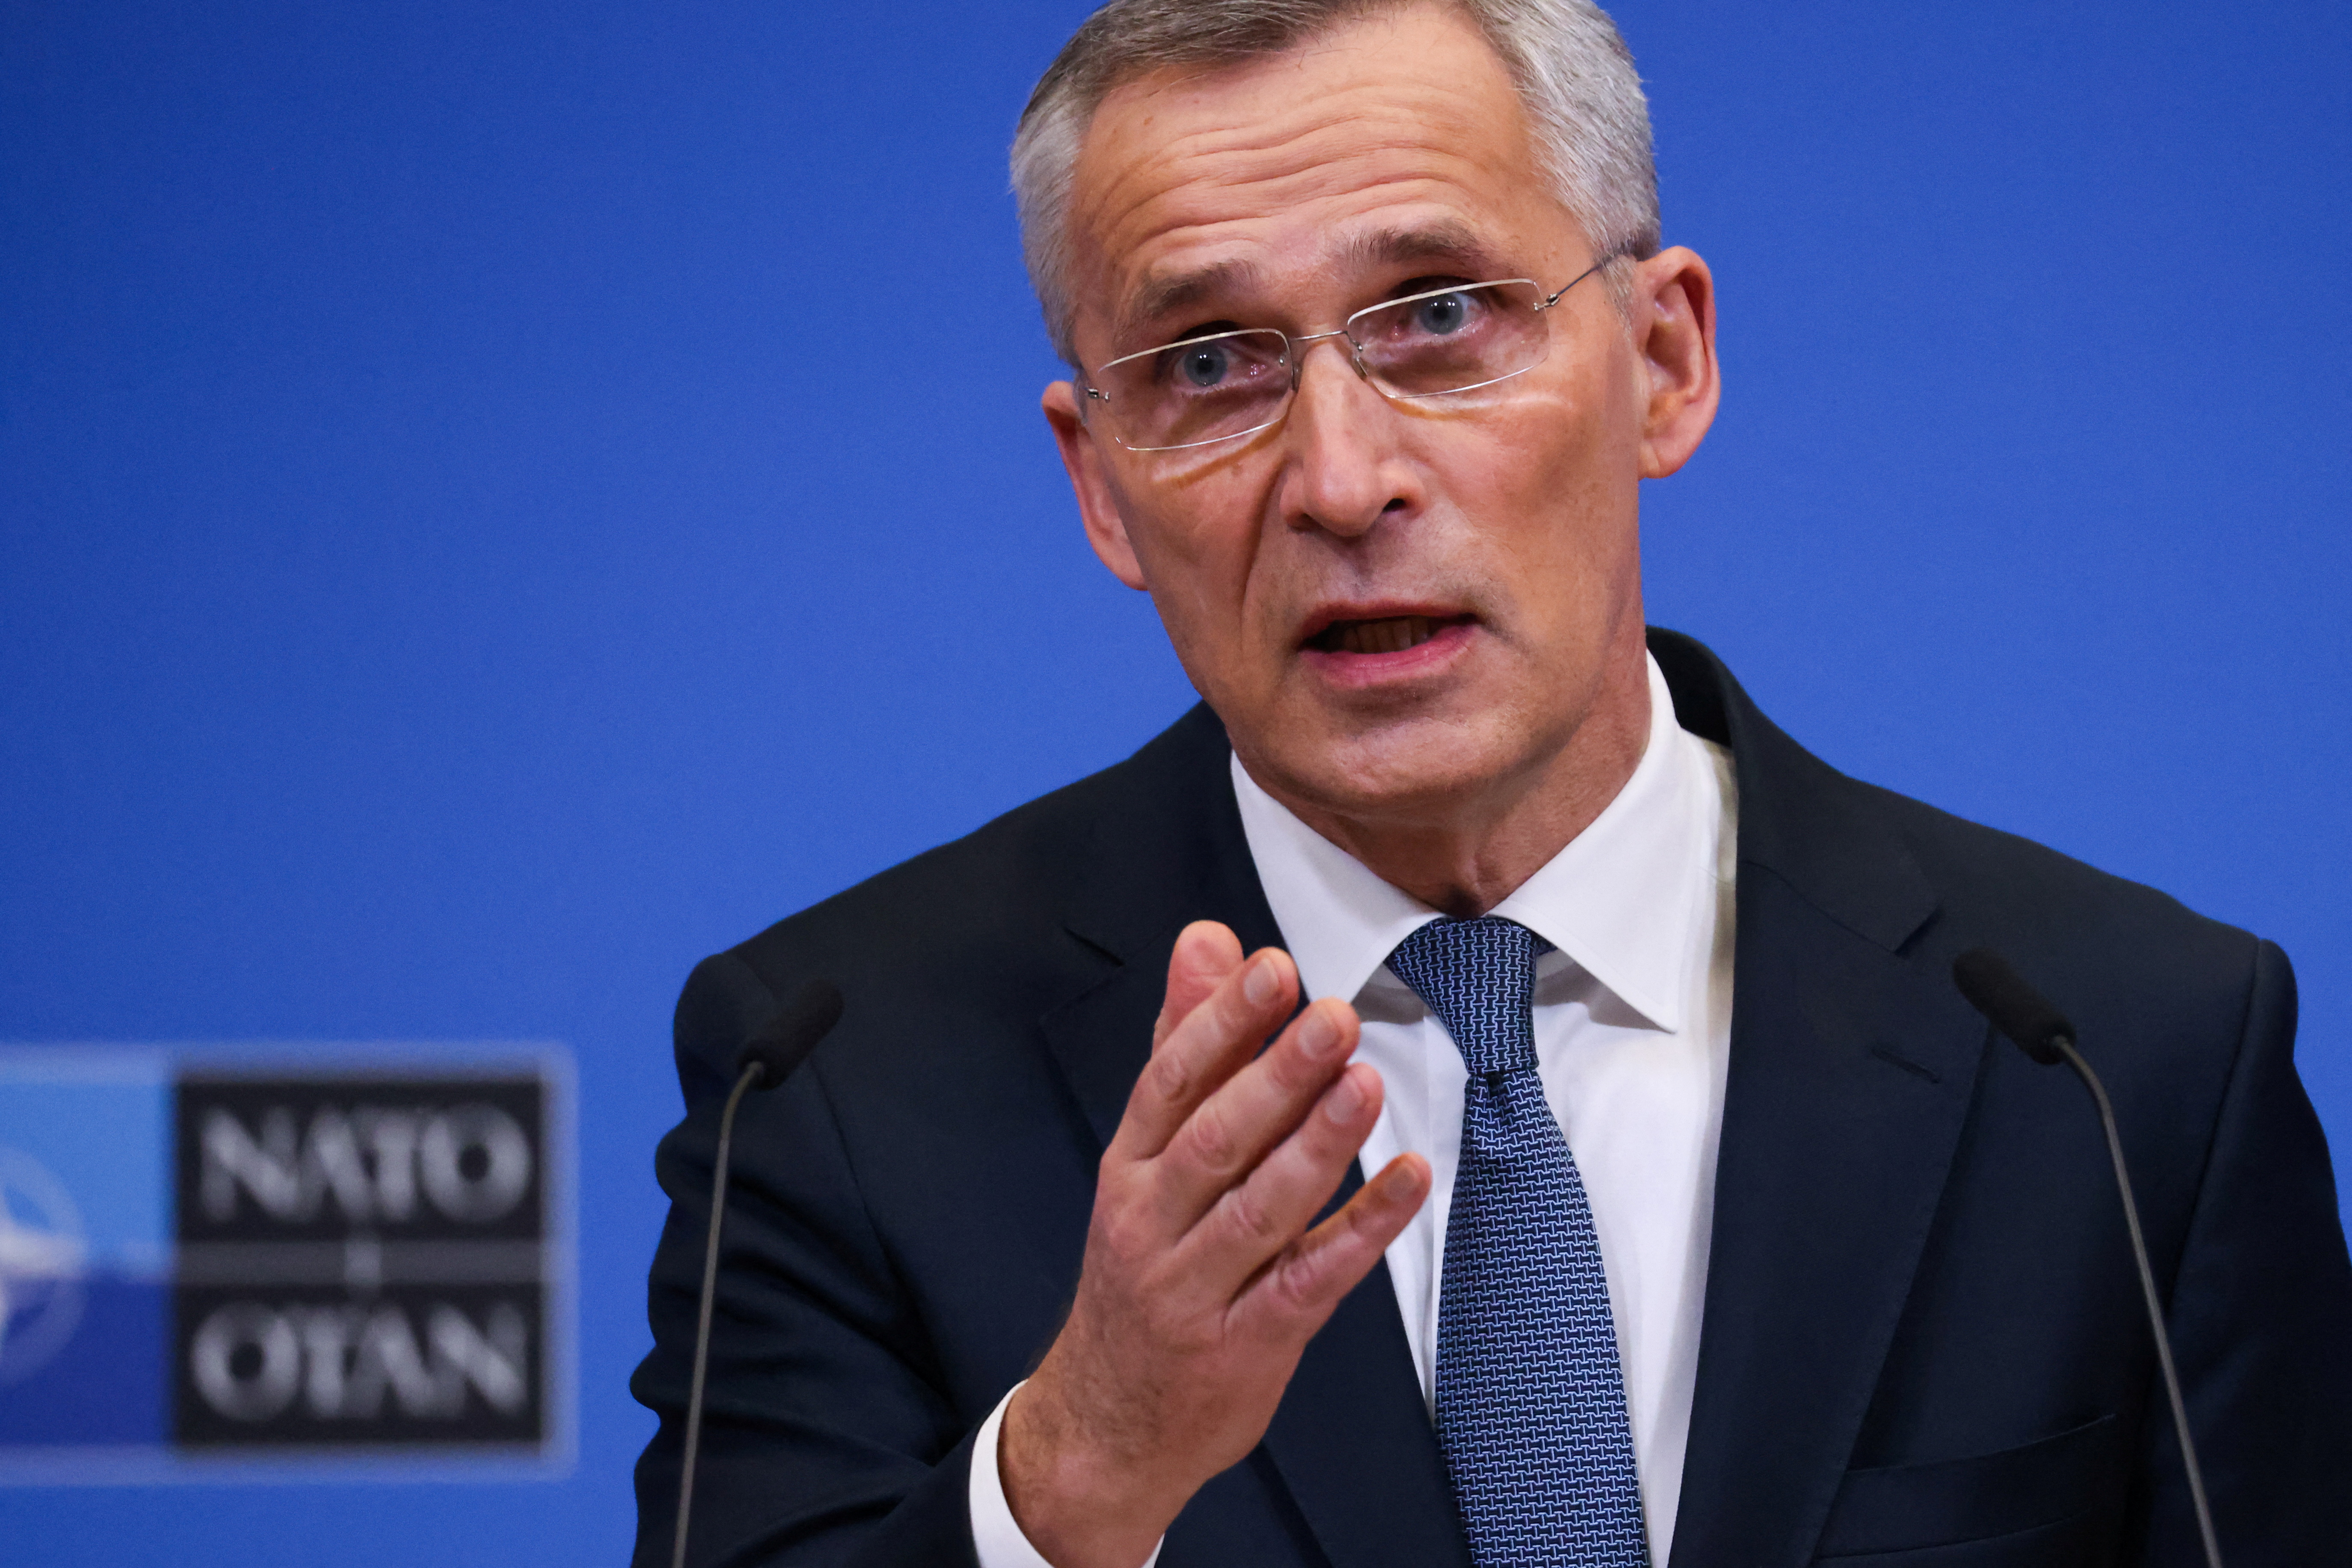 NATO Secretary-General Jens Stoltenberg speaks at a news conference following a NATO leaders virtual summit, after Russia launched a massive military operation against Ukraine, in Brussels, Belgium February 25, 2022. REUTERS/Yves Herman